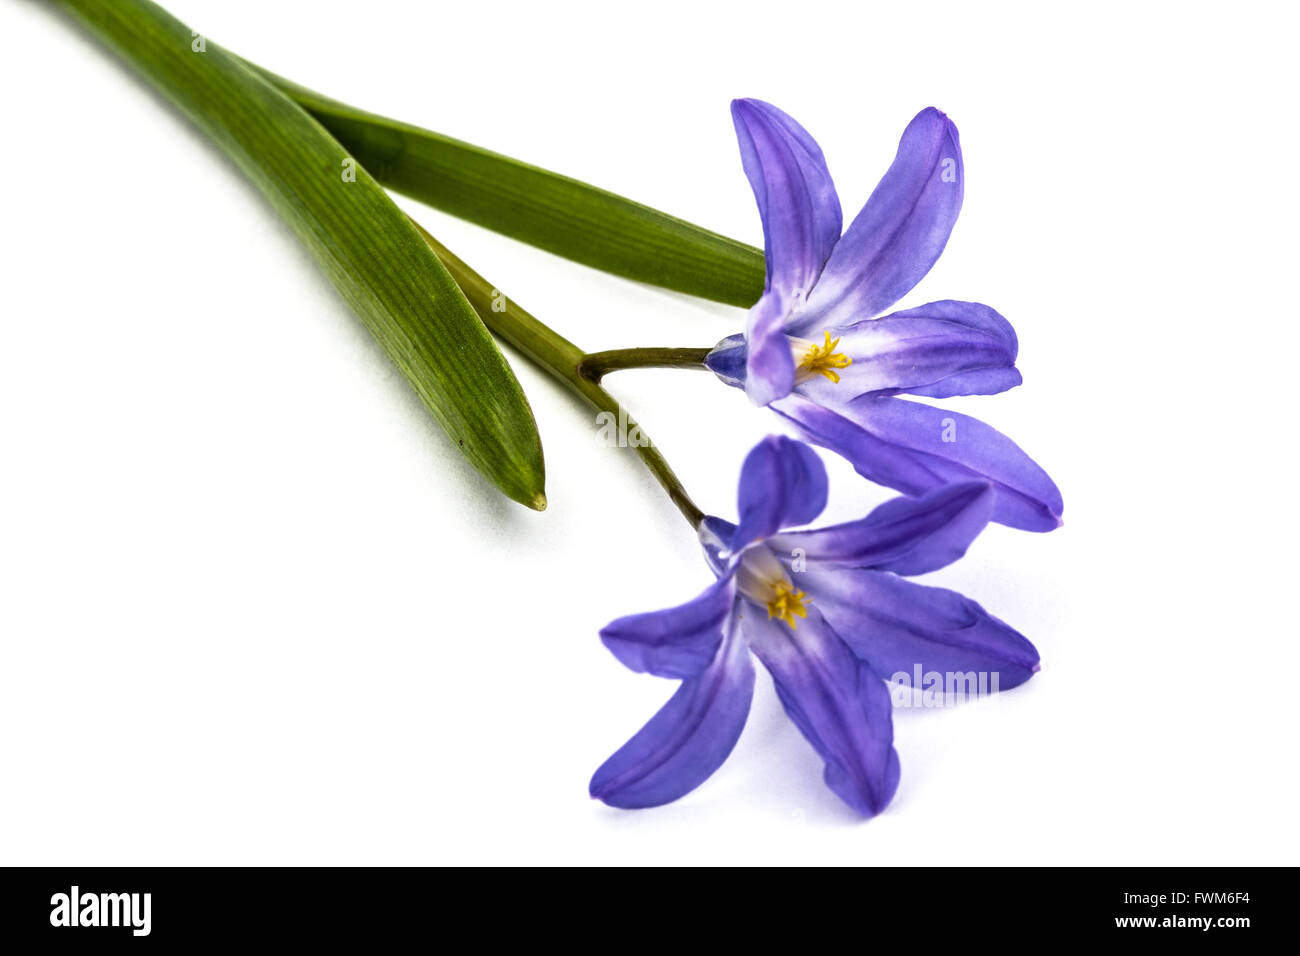 Violet flowers of Chionodoxa luciliae, Glory of the snow, isolated on white background Stock Photo